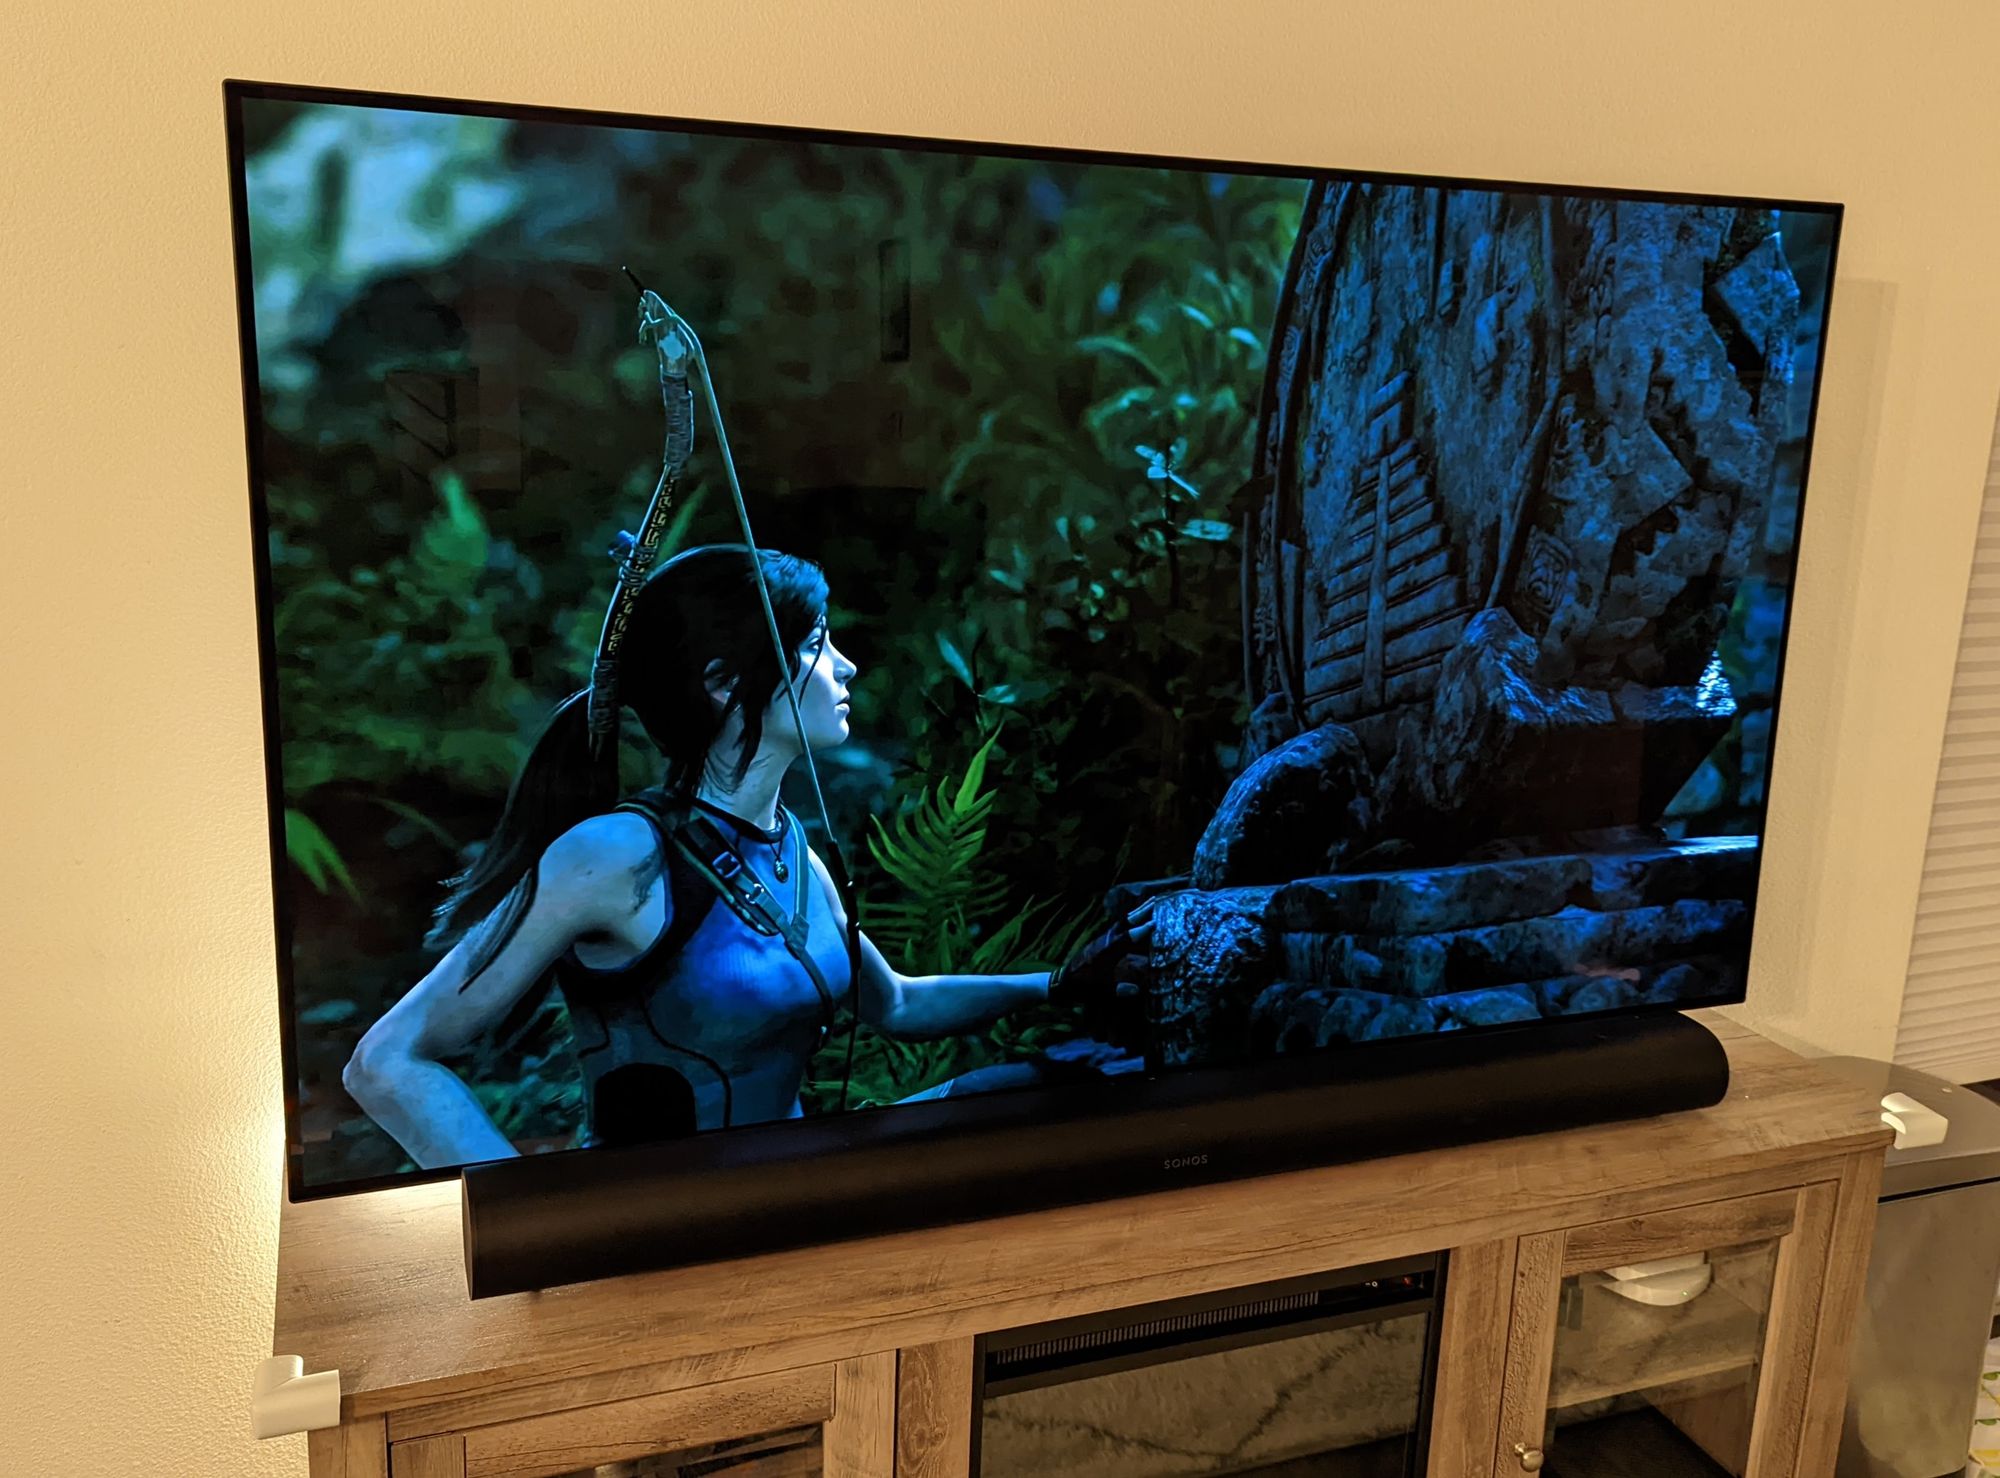 How to stream games from your gaming PC to any device in your home without a subscription